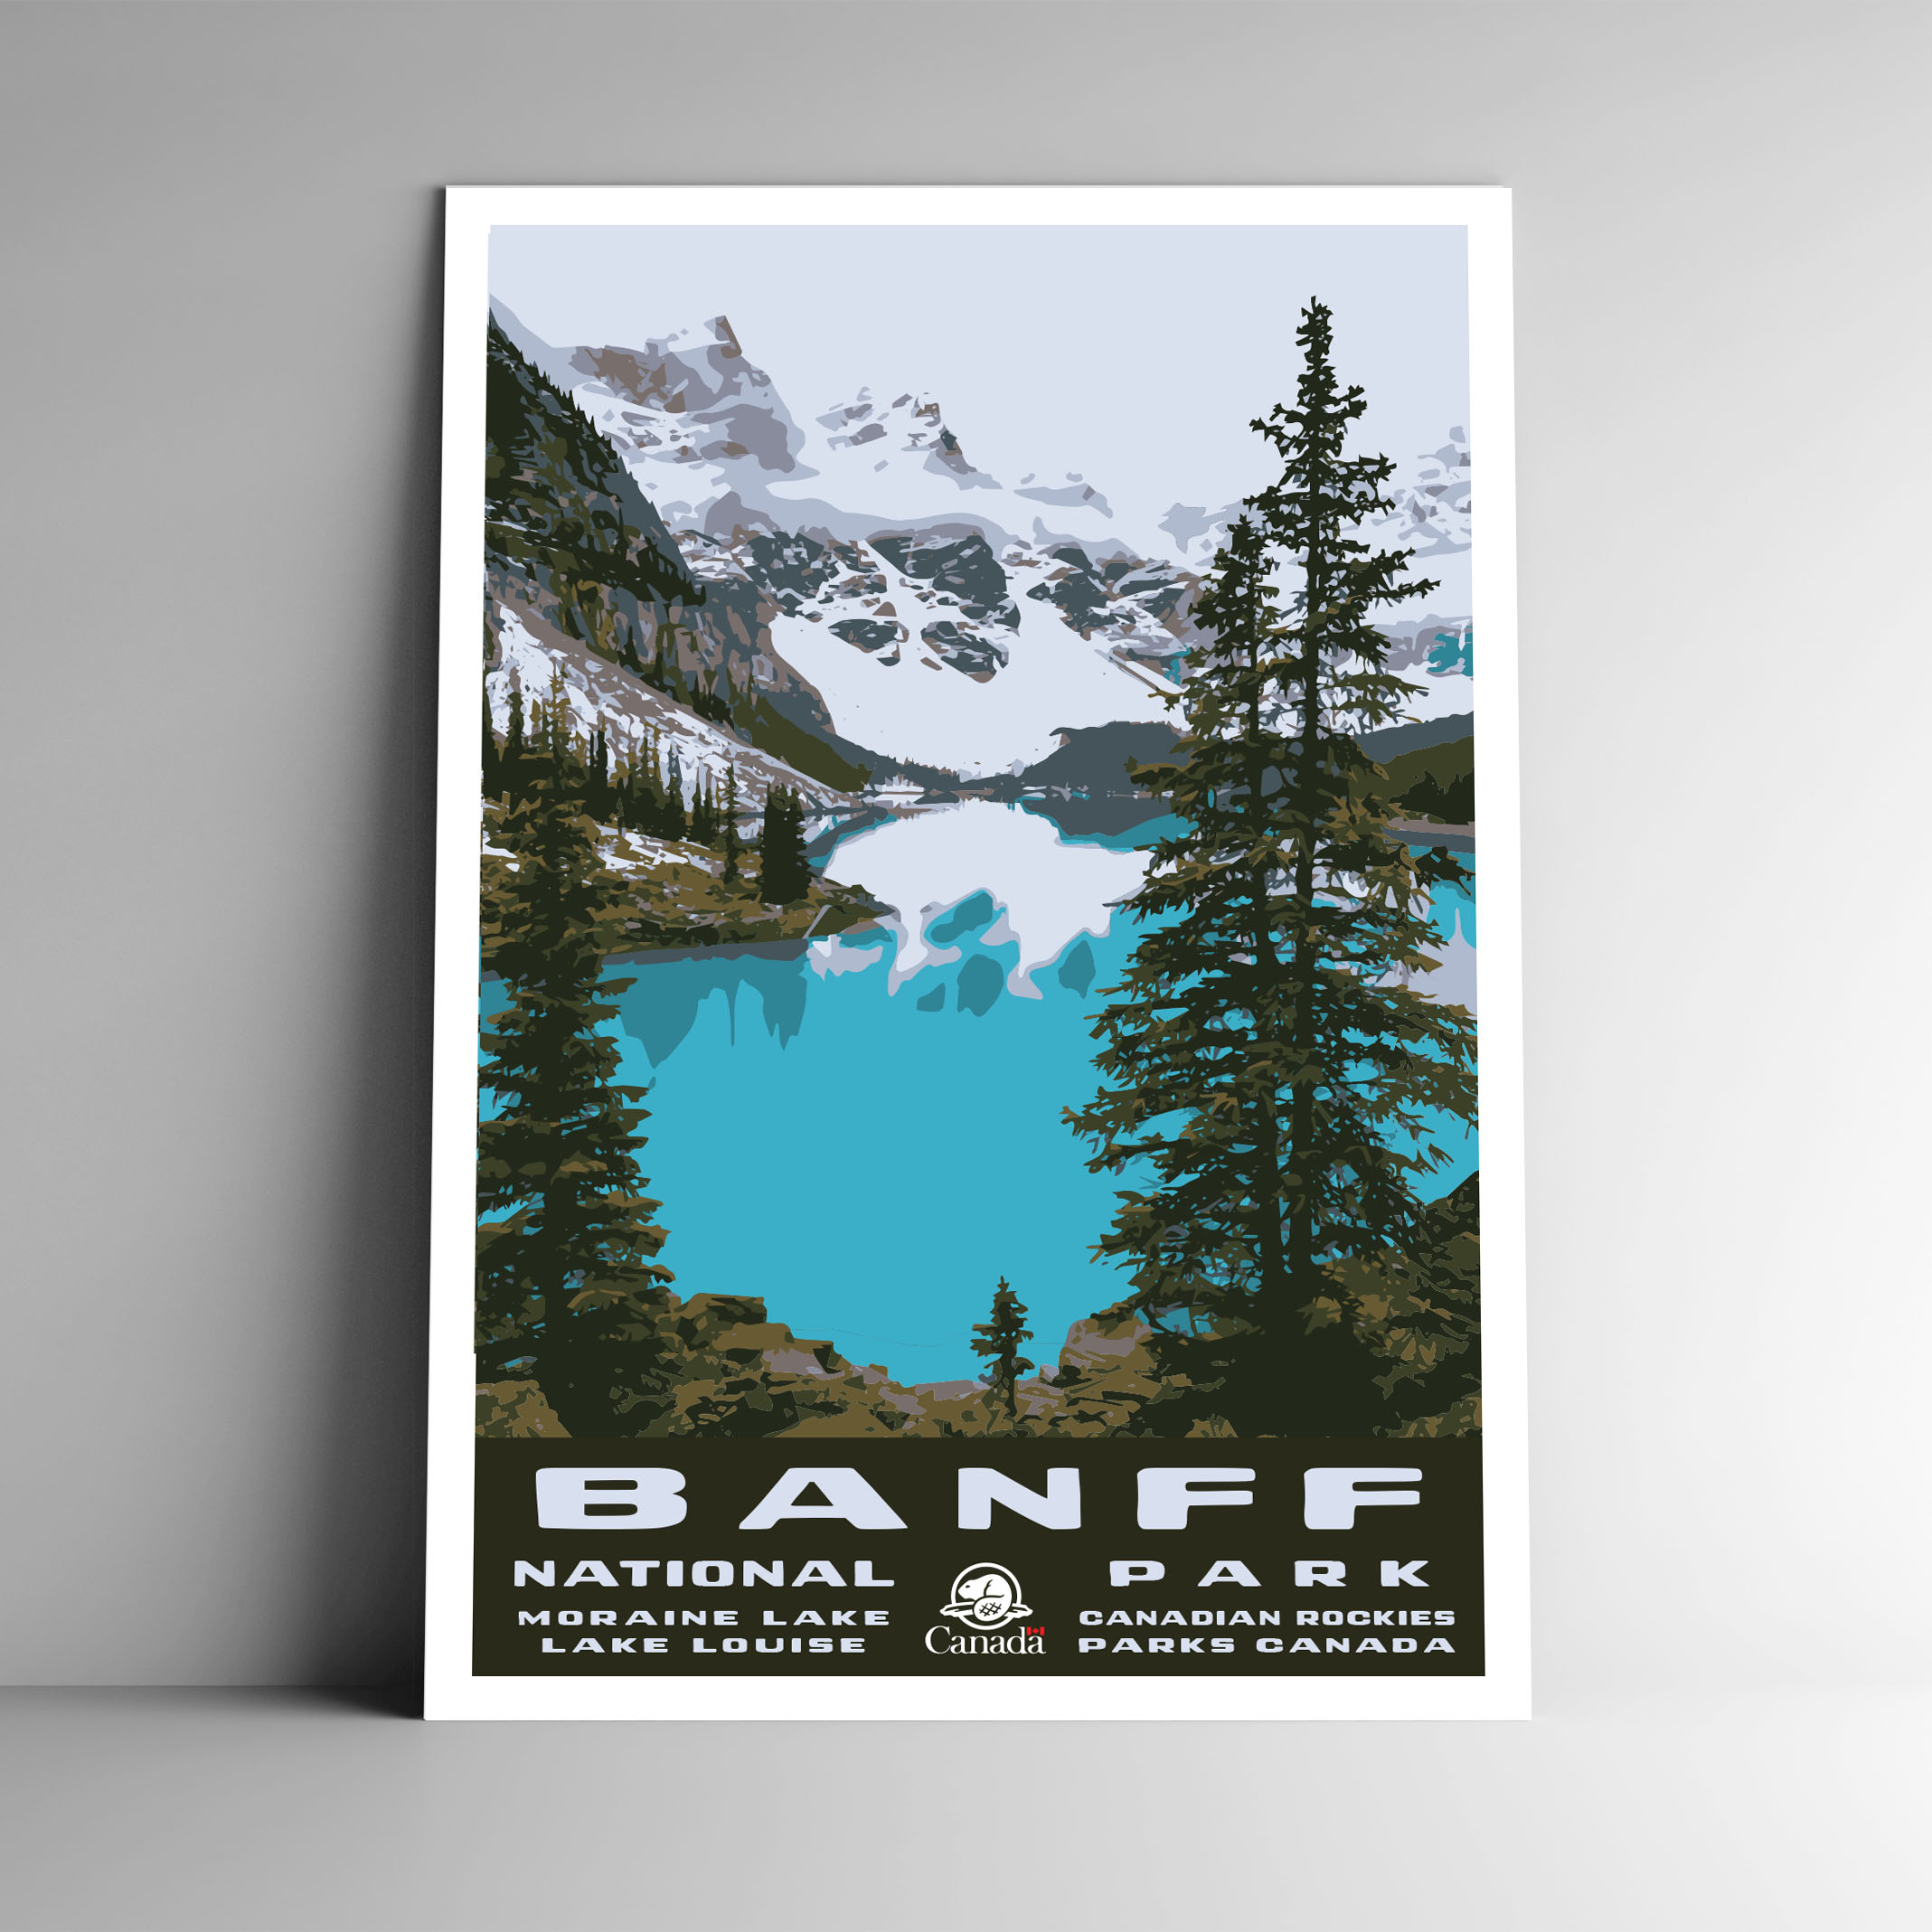 Vintage-Style - :: 24x36 / Canada 4x6 Alberta :: National Living - WPA-Style Poster - Art - Wall Postcard Banff Wall Parks Decor Travel Home Canada / & 8x10 Park 12x18 Parcs 18x24 ::